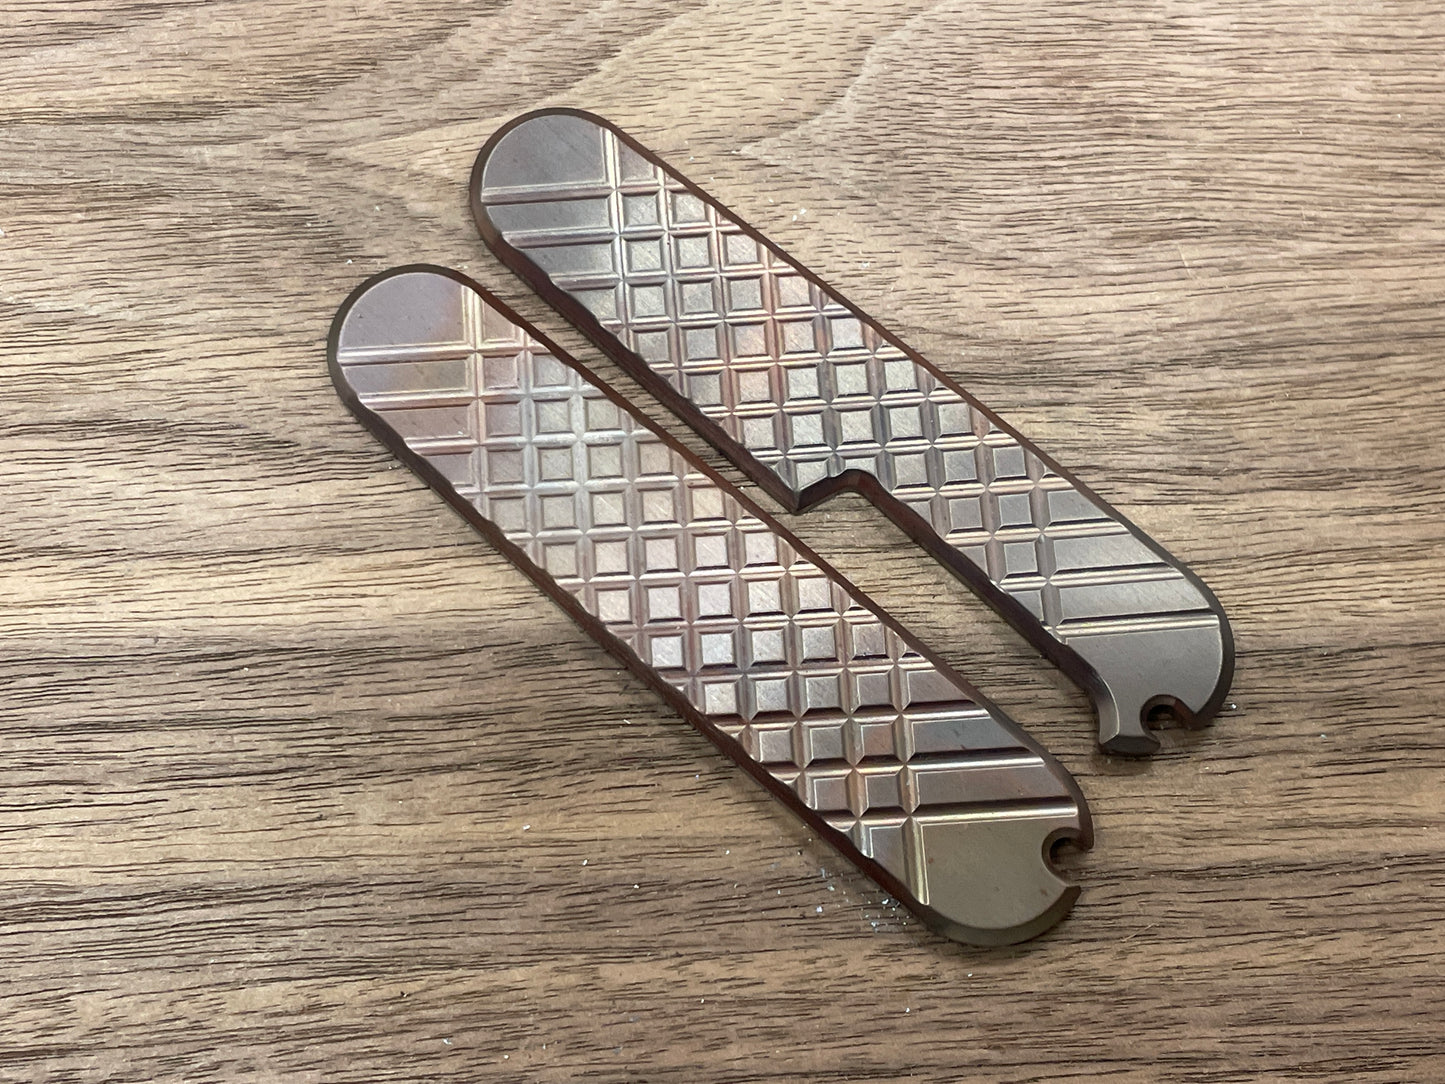 FRAG milled 91mm Aged Copper Scales for Swiss Army SAK